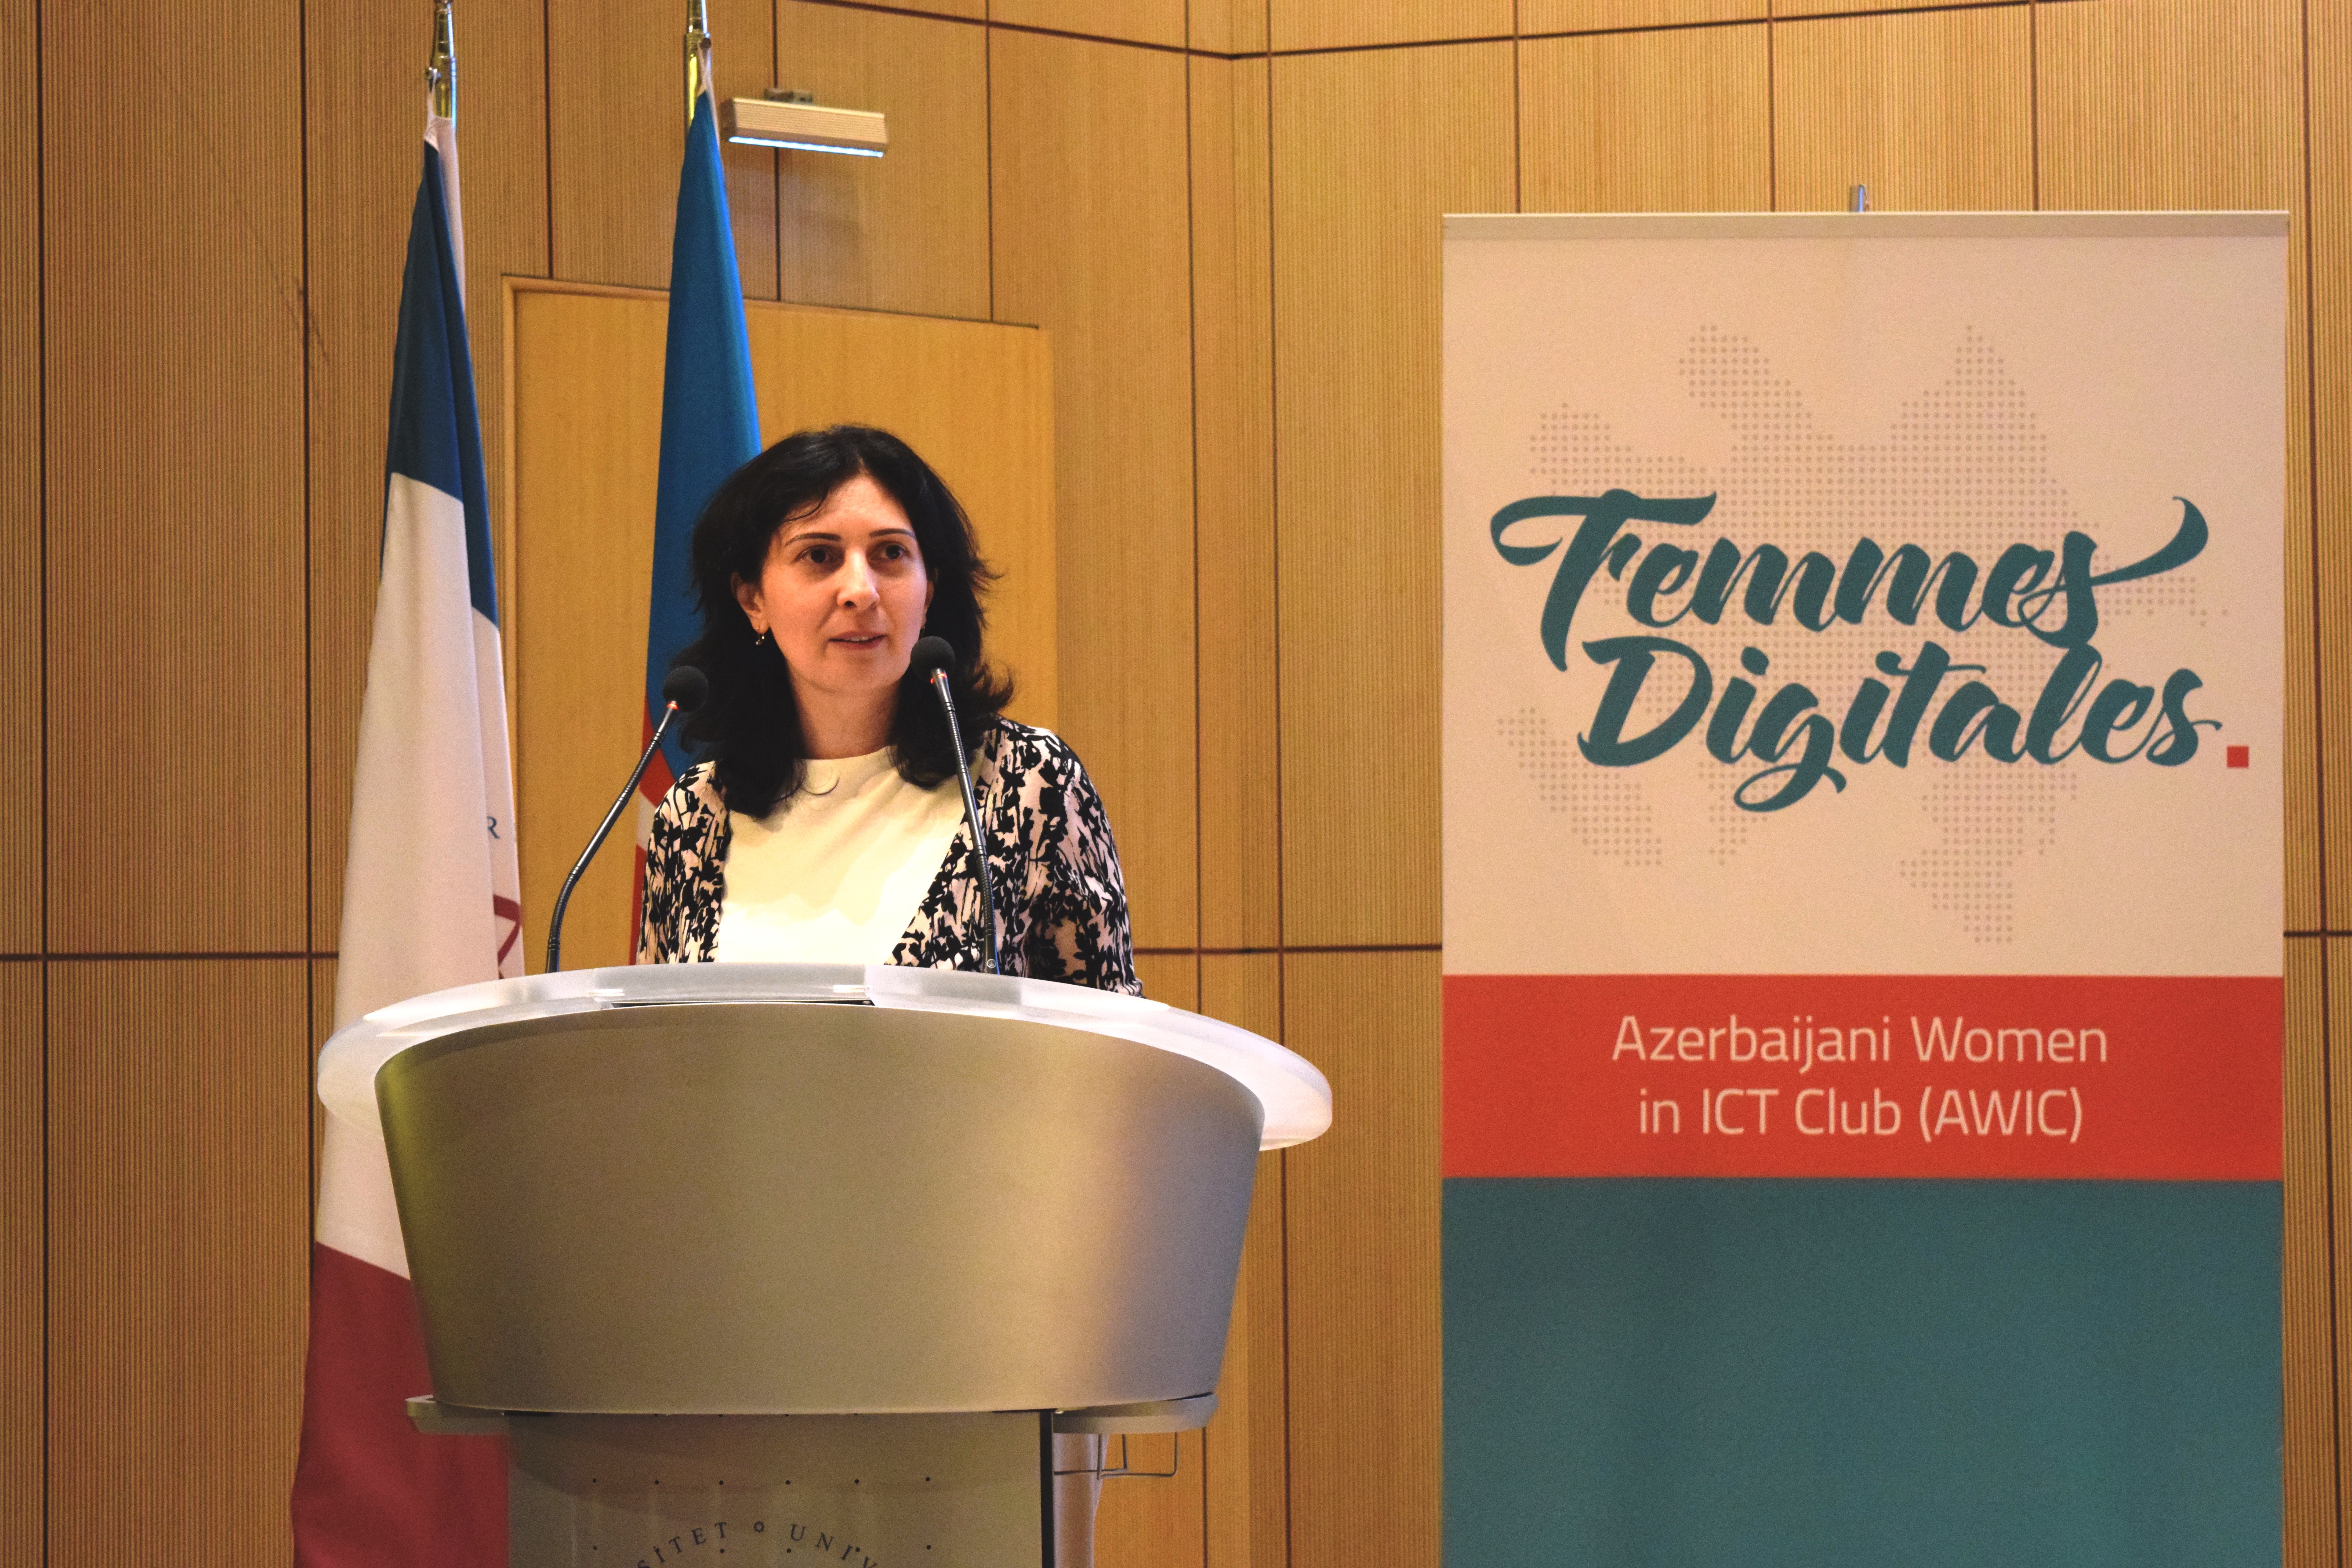 Azercell highlights women’s role in ICT